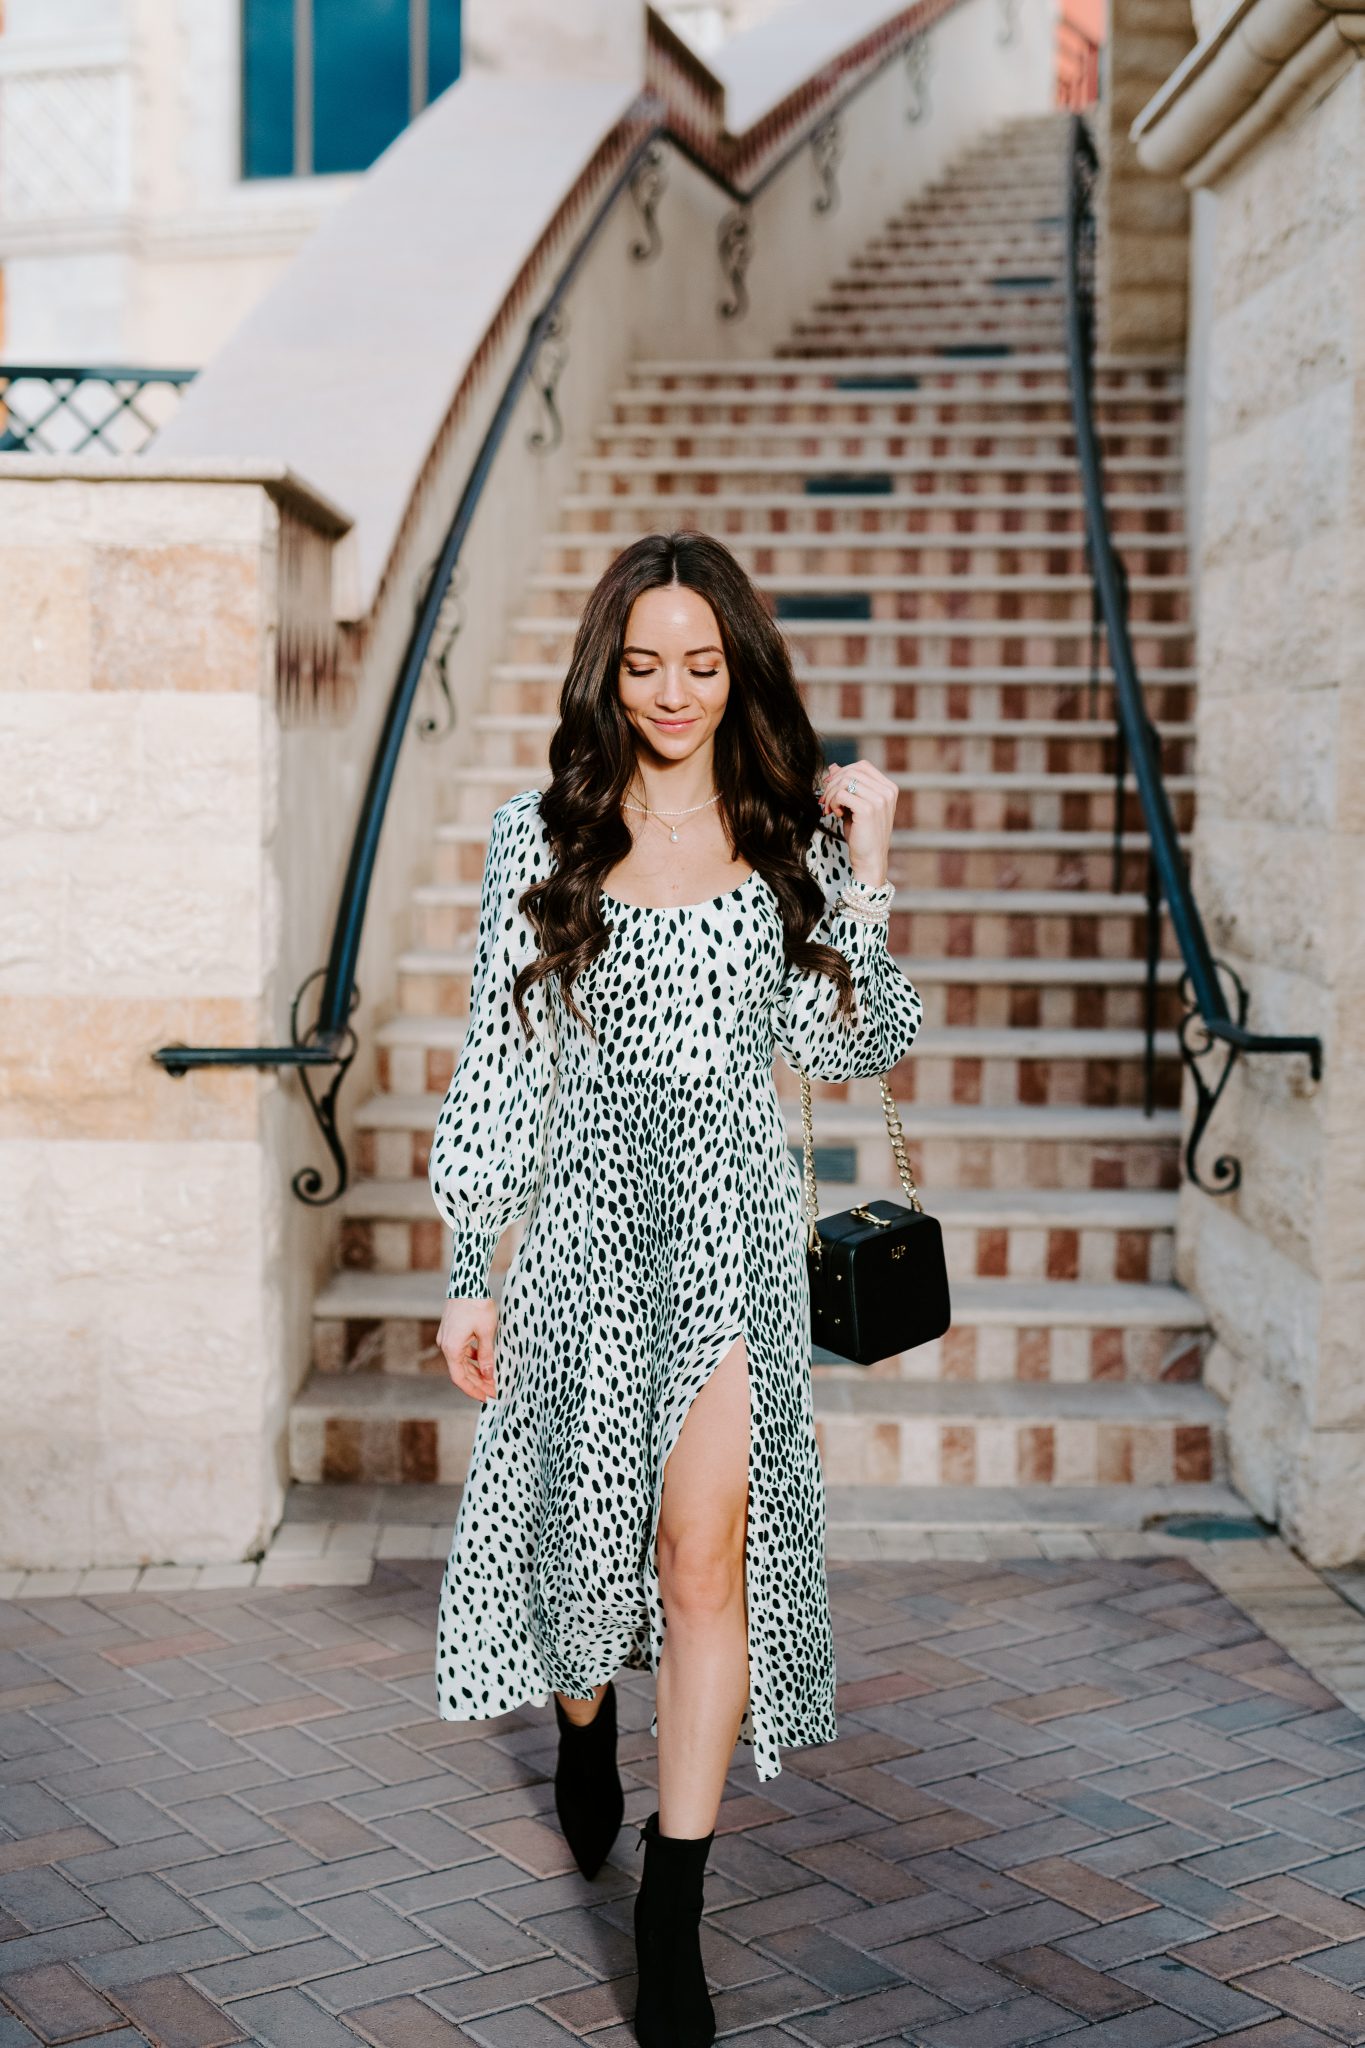 Wedding Guest Dresses by popular Las Vegas fashion blog, Outfits and Outings: image of a woman wearing a long sleeve black and white print maxi dress with a high leg slit, pearl jewelry and carrying a square shaped black bag.